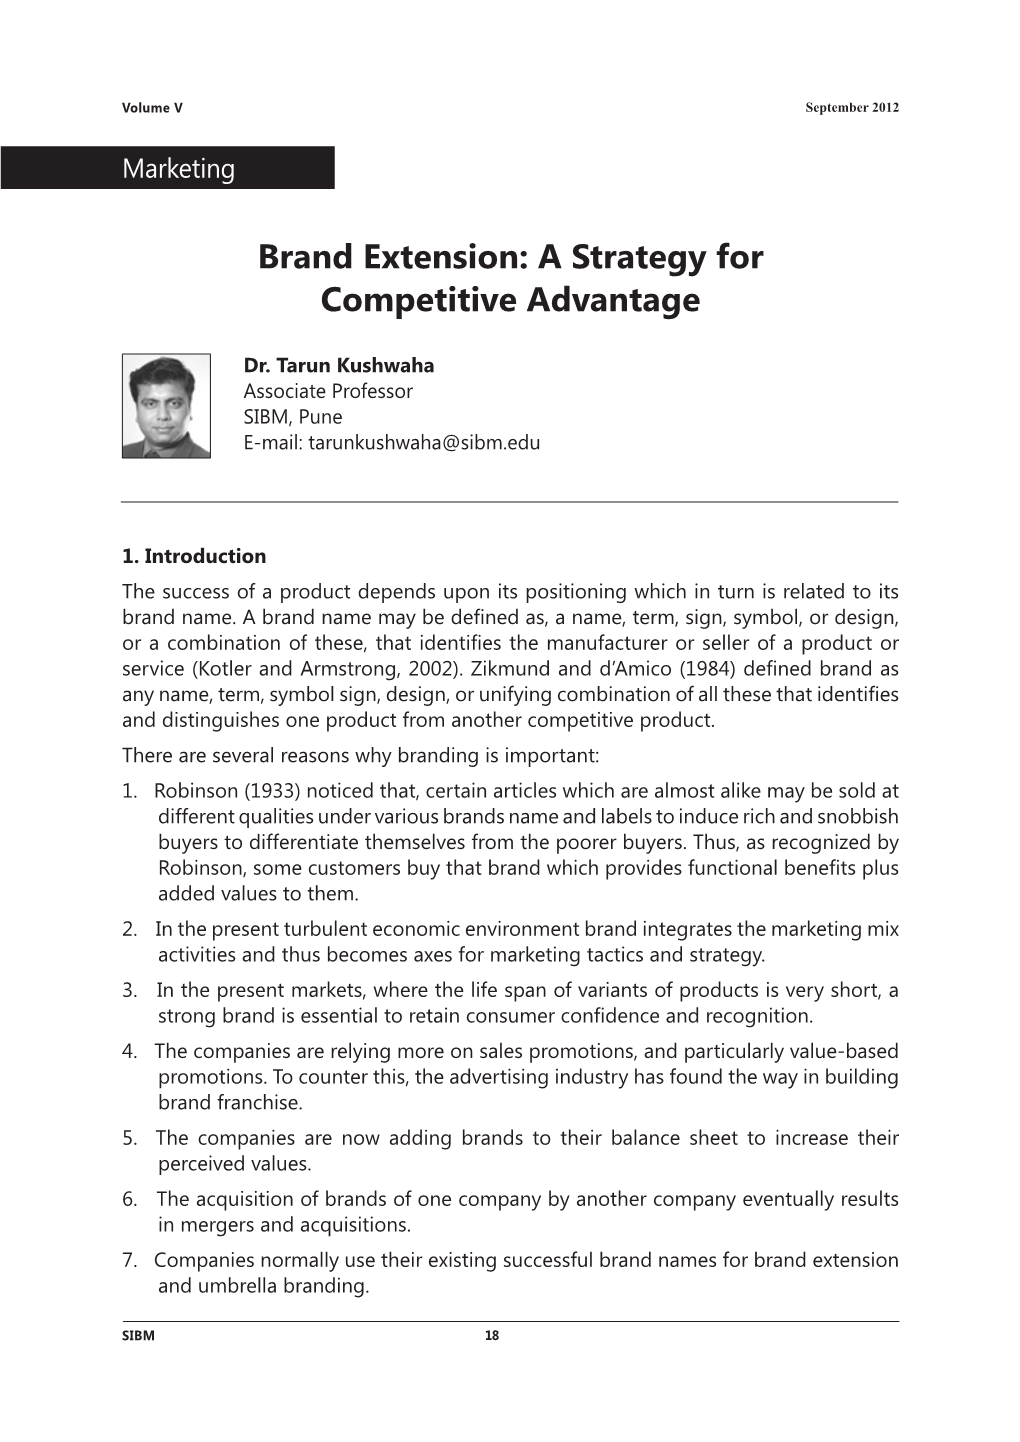 Brand Extension: a Strategy for Competitive Advantage